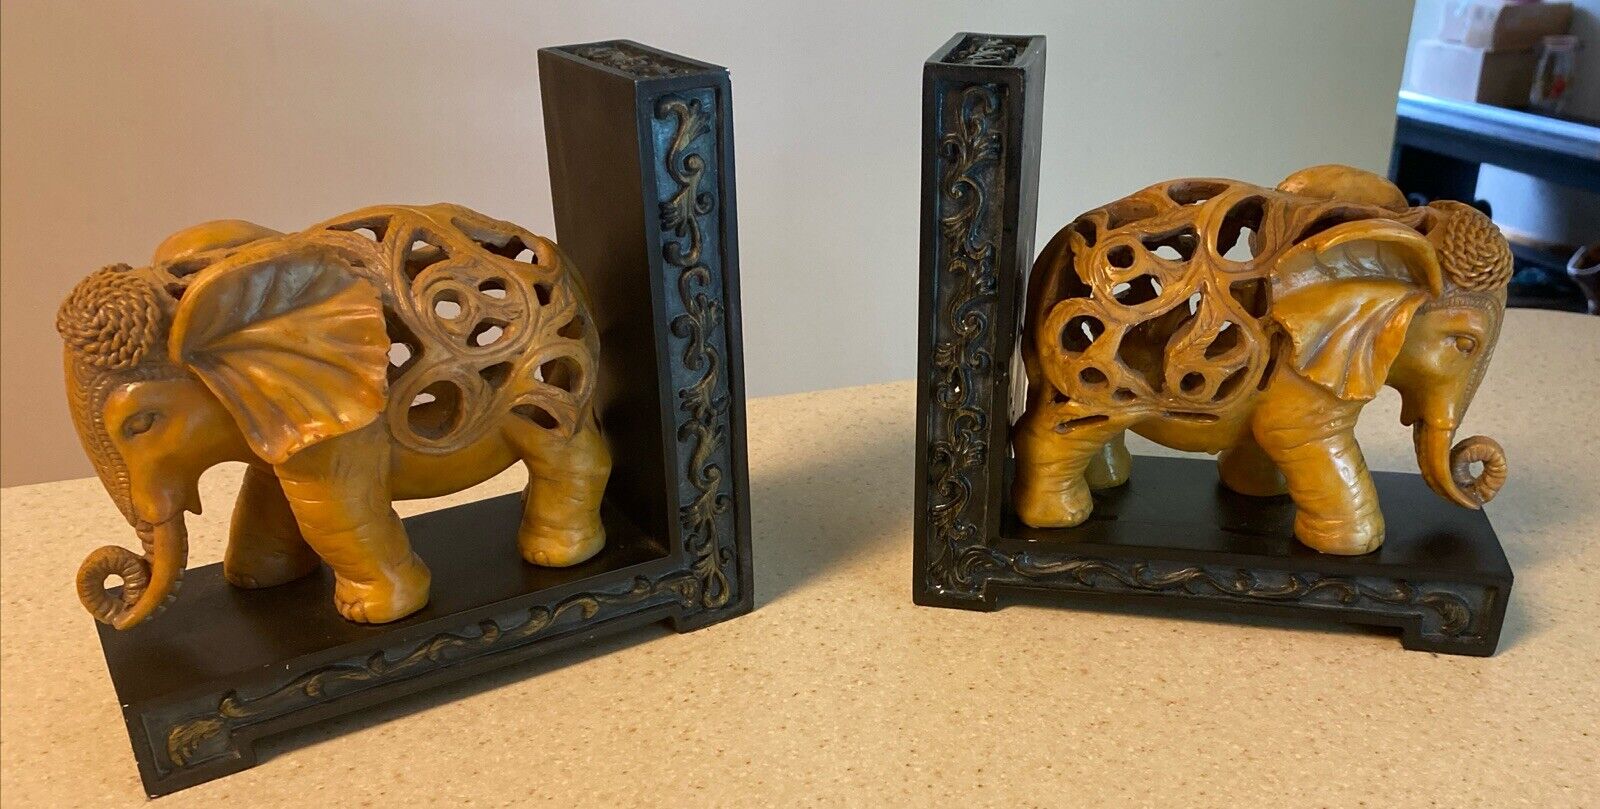 Rare Exotic Pier One Heavy Resin-Carved Wood Look Elephant Bookends 2 Piece